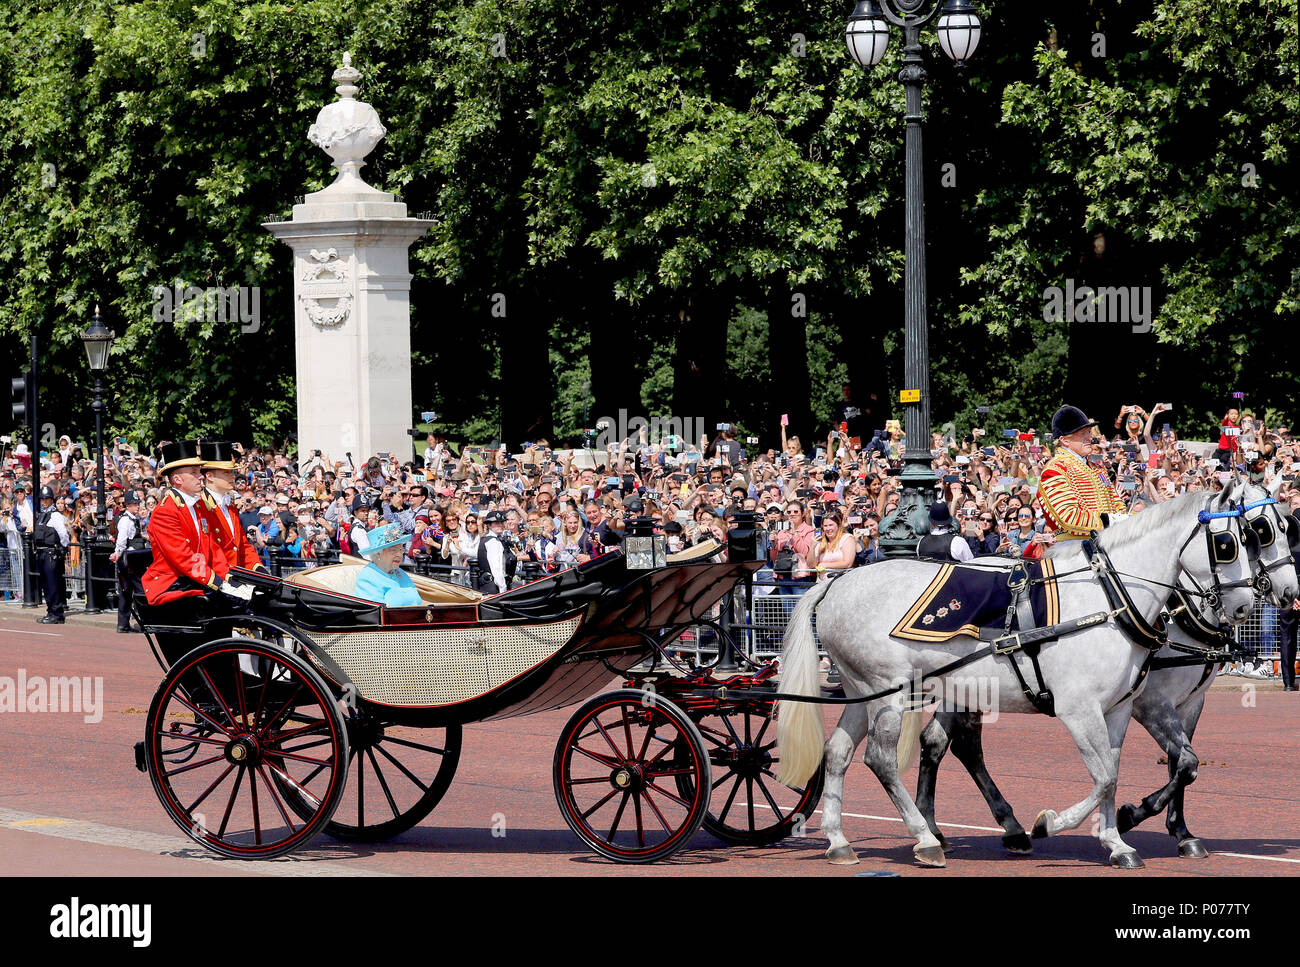 London, UK. 09th June, 2018. Queen Elizabeth II leave at Buckingham Palace in London, on June 09, 2018, to attend Trooping the colour, the Queens birthday parade Photo : Albert Nieboer/Netherlands OUT/Point de Vue OUT - NO WIRE SERVICE - Credit: Albert Nieboer/RoyalPress/dpa/Alamy Live News Stock Photo